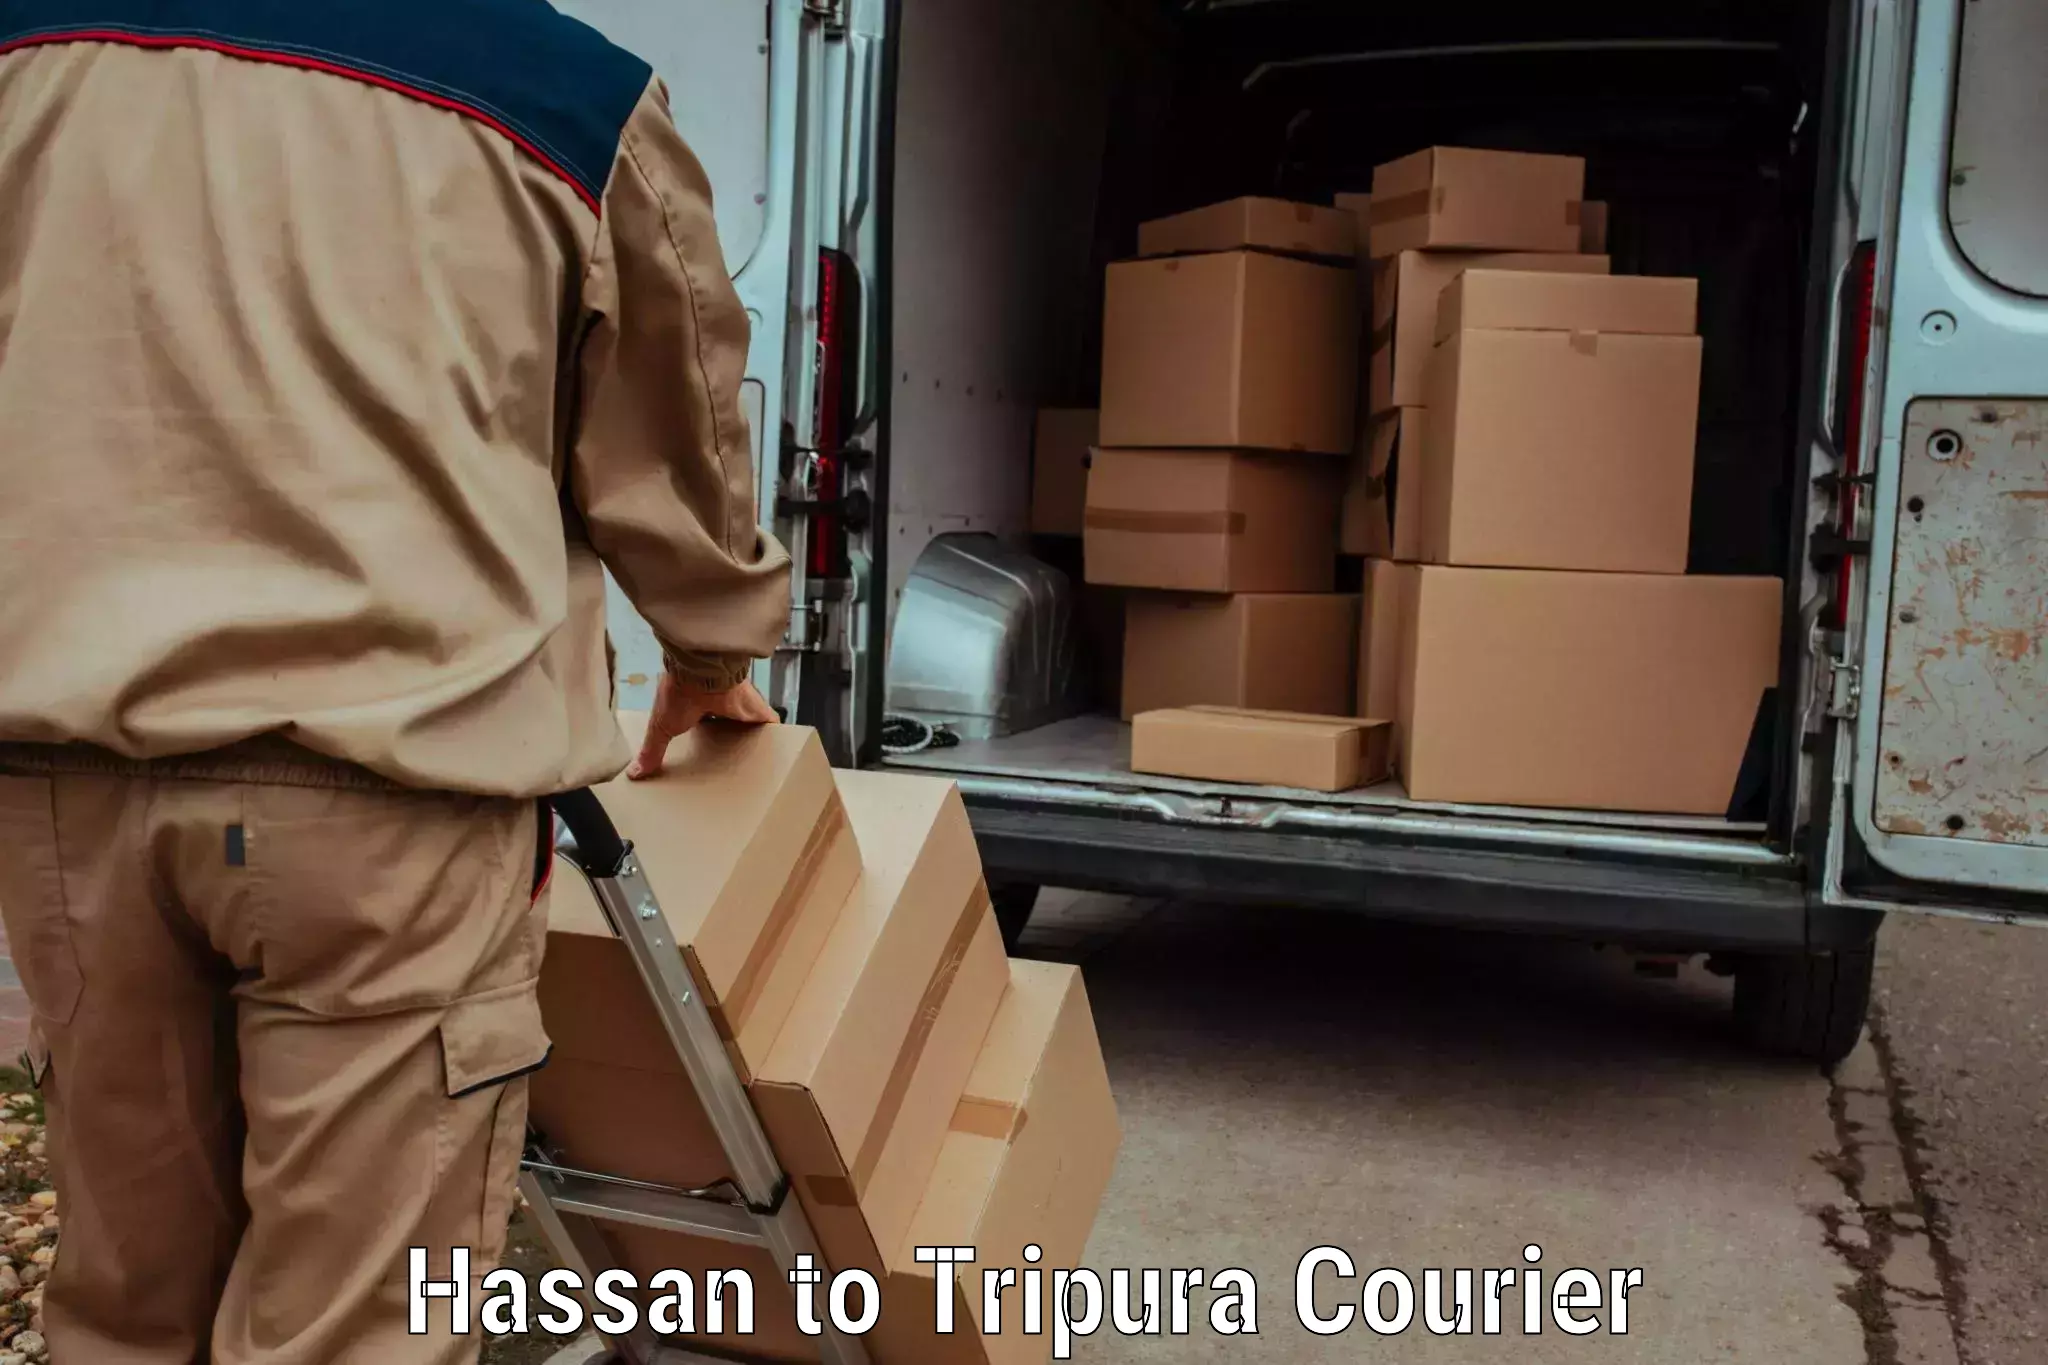 Cash on delivery service Hassan to Tripura